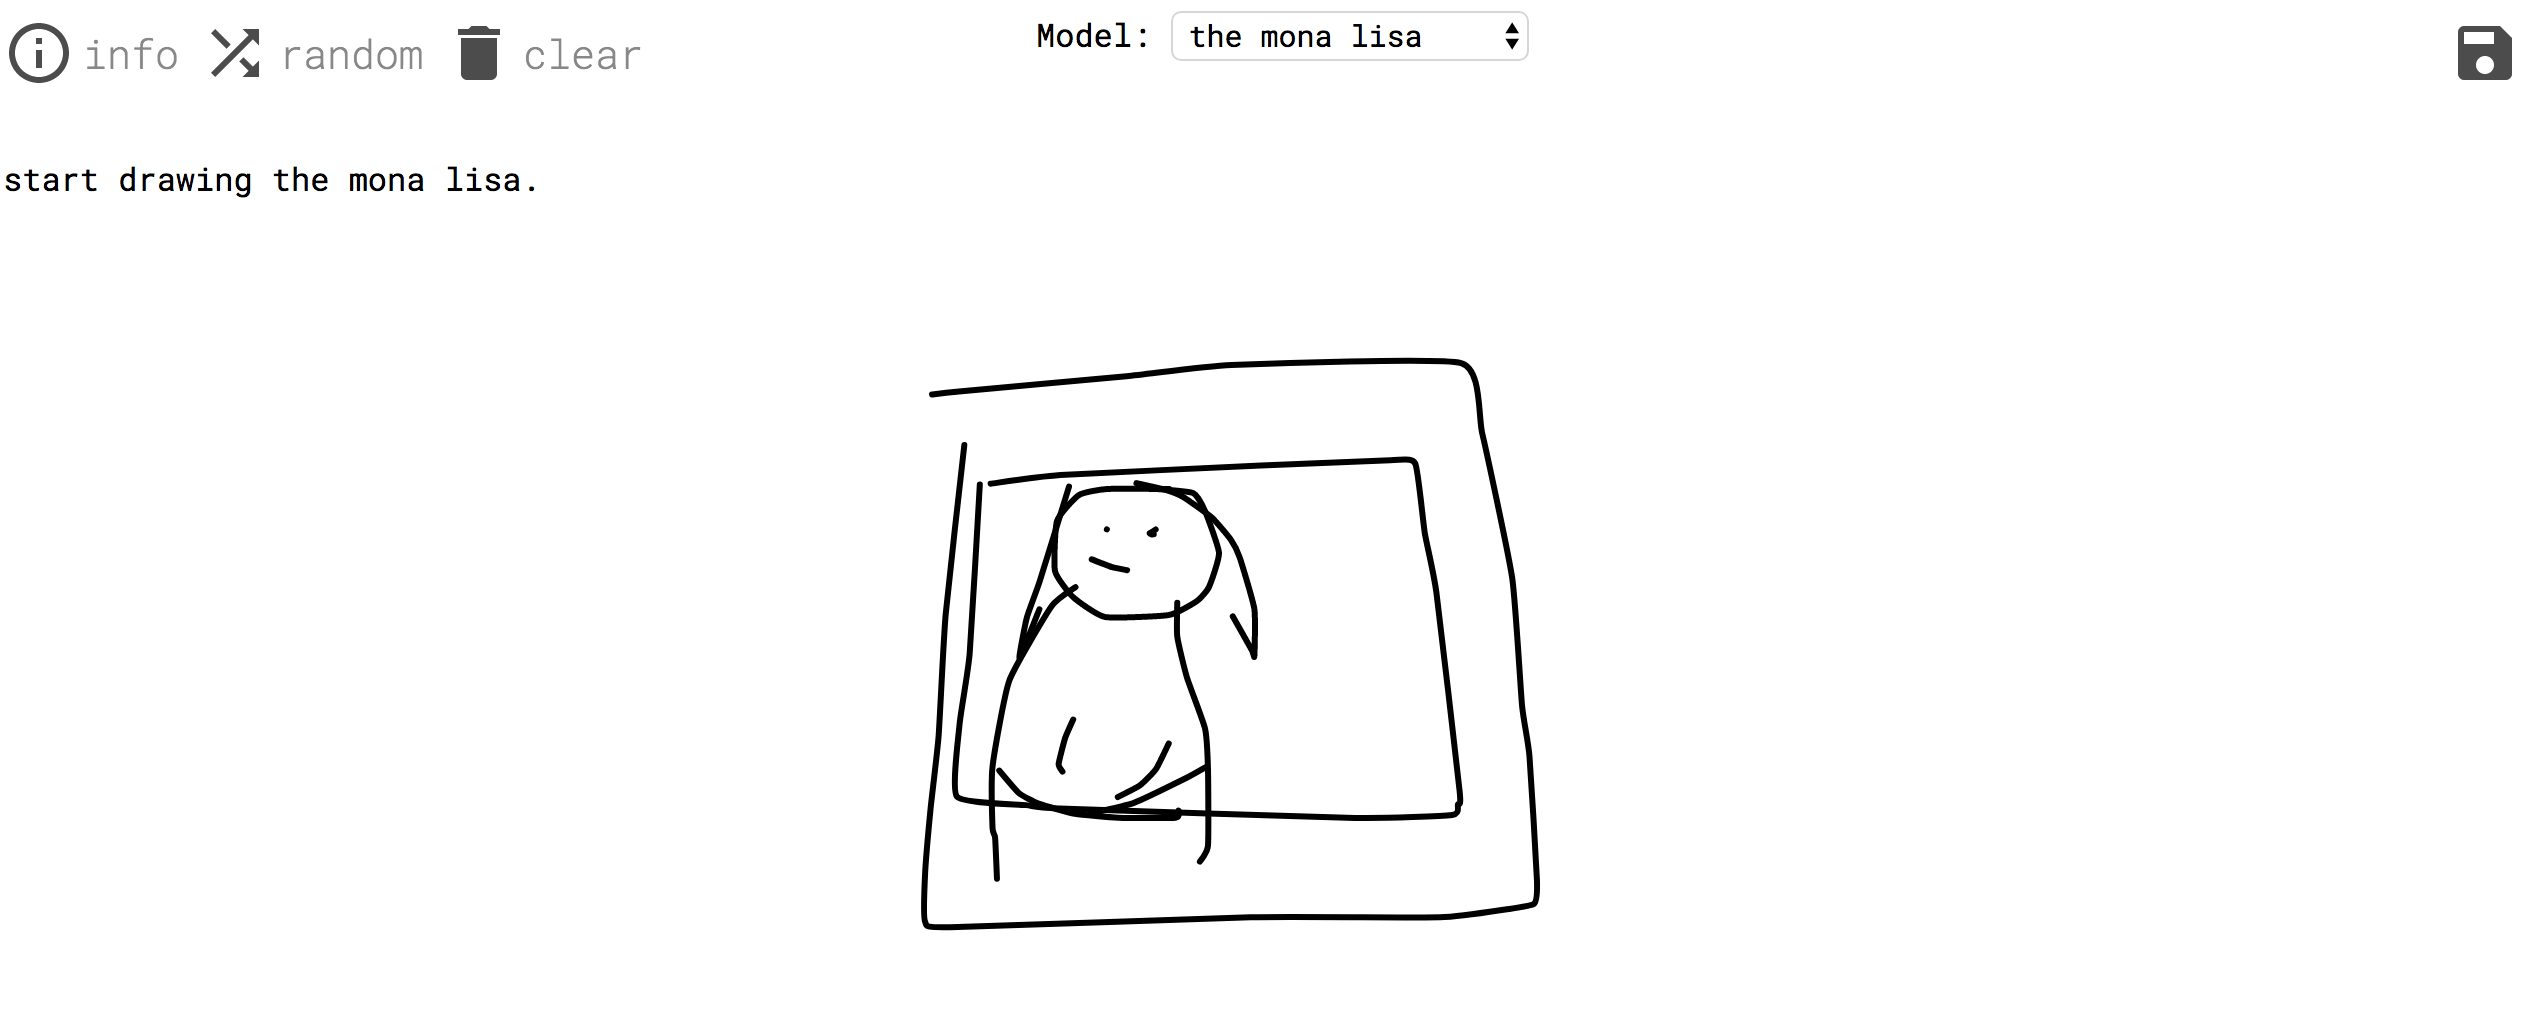 Example sketch-rnn output of the mona lisa.